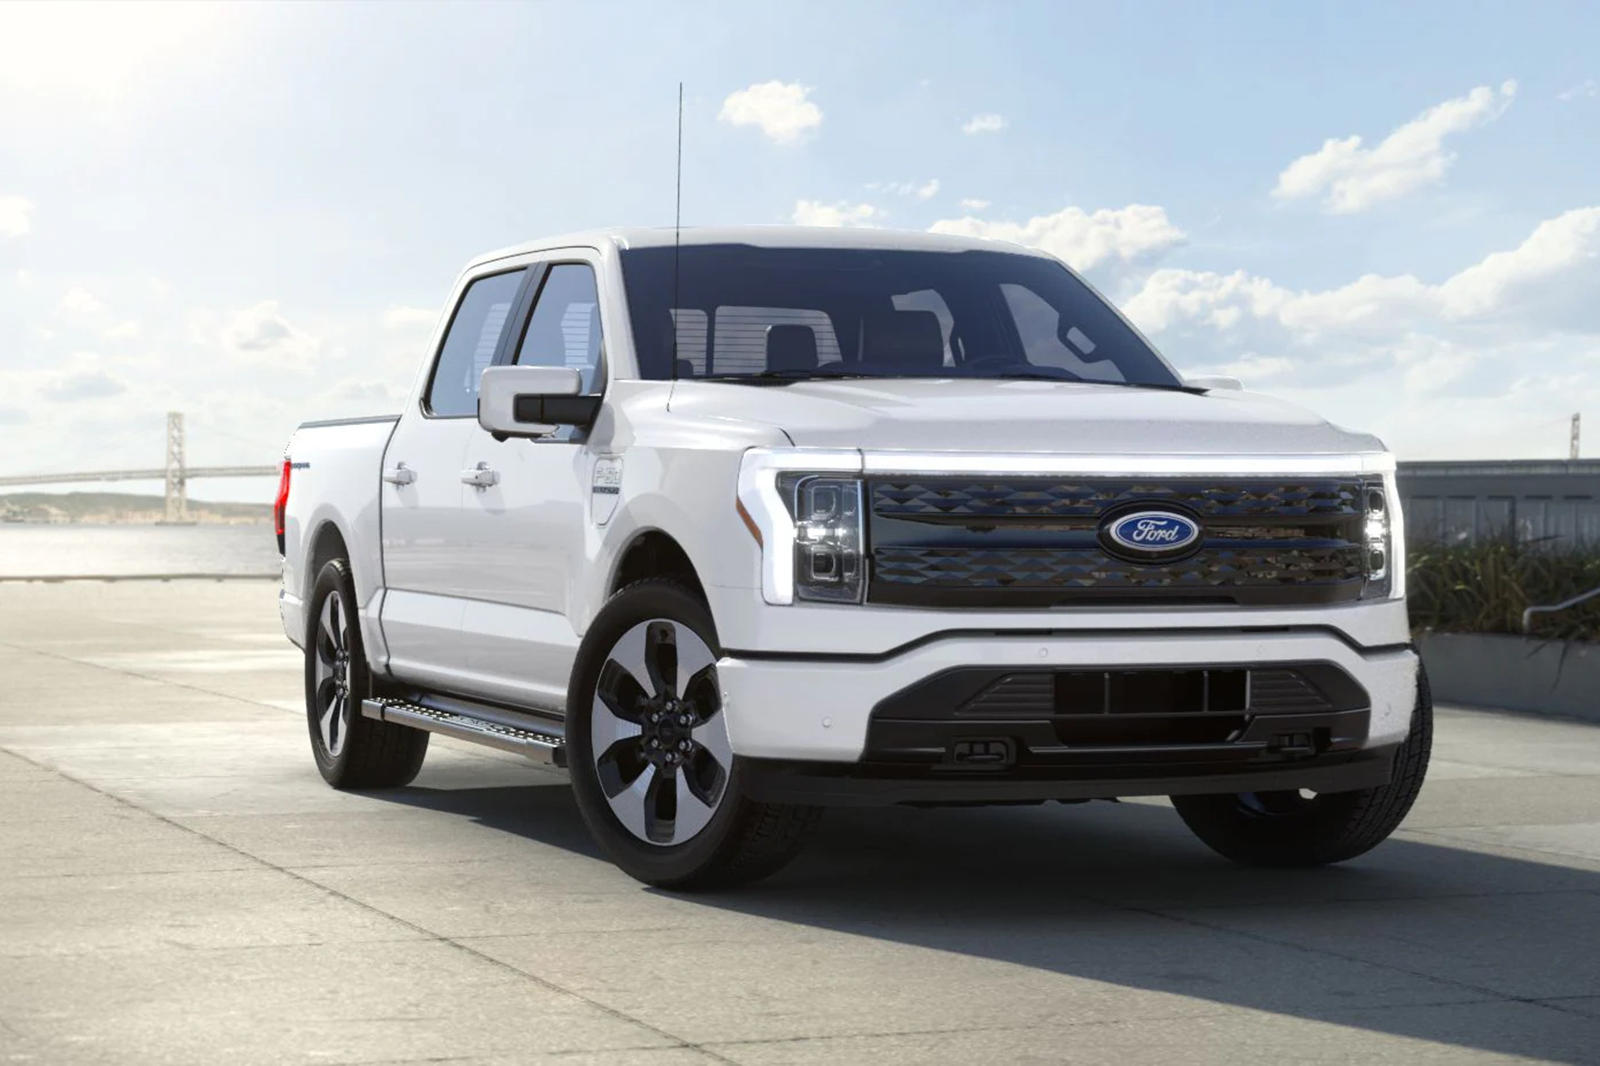 Full Ford F-150 Lightning Pricing Leaks Early | CarBuzz